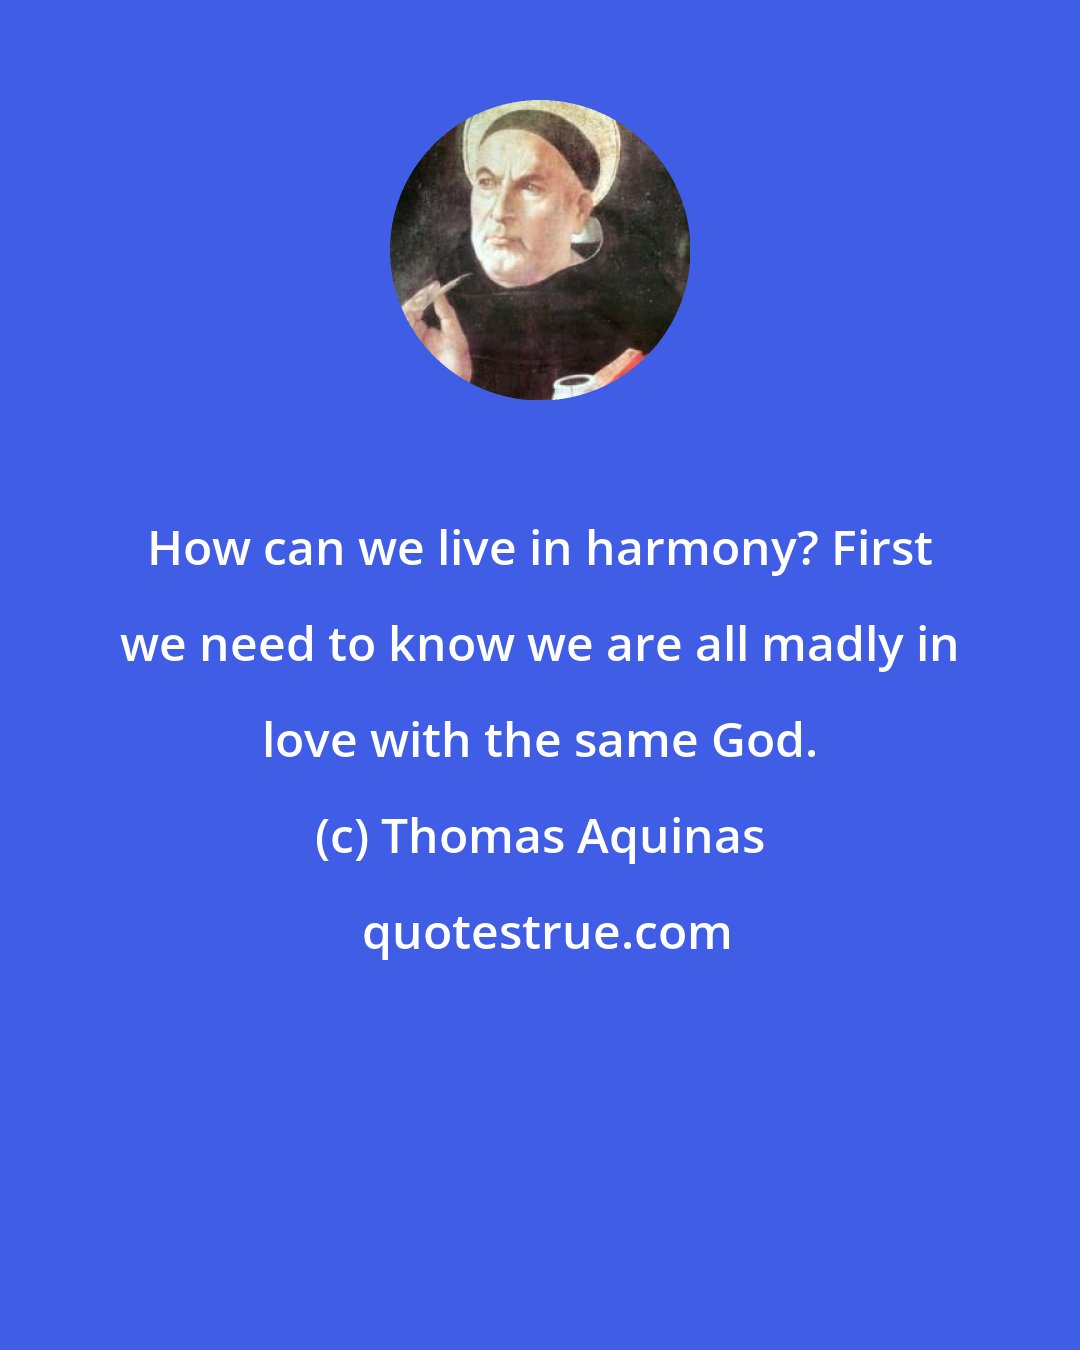 Thomas Aquinas: How can we live in harmony? First we need to know we are all madly in love with the same God.